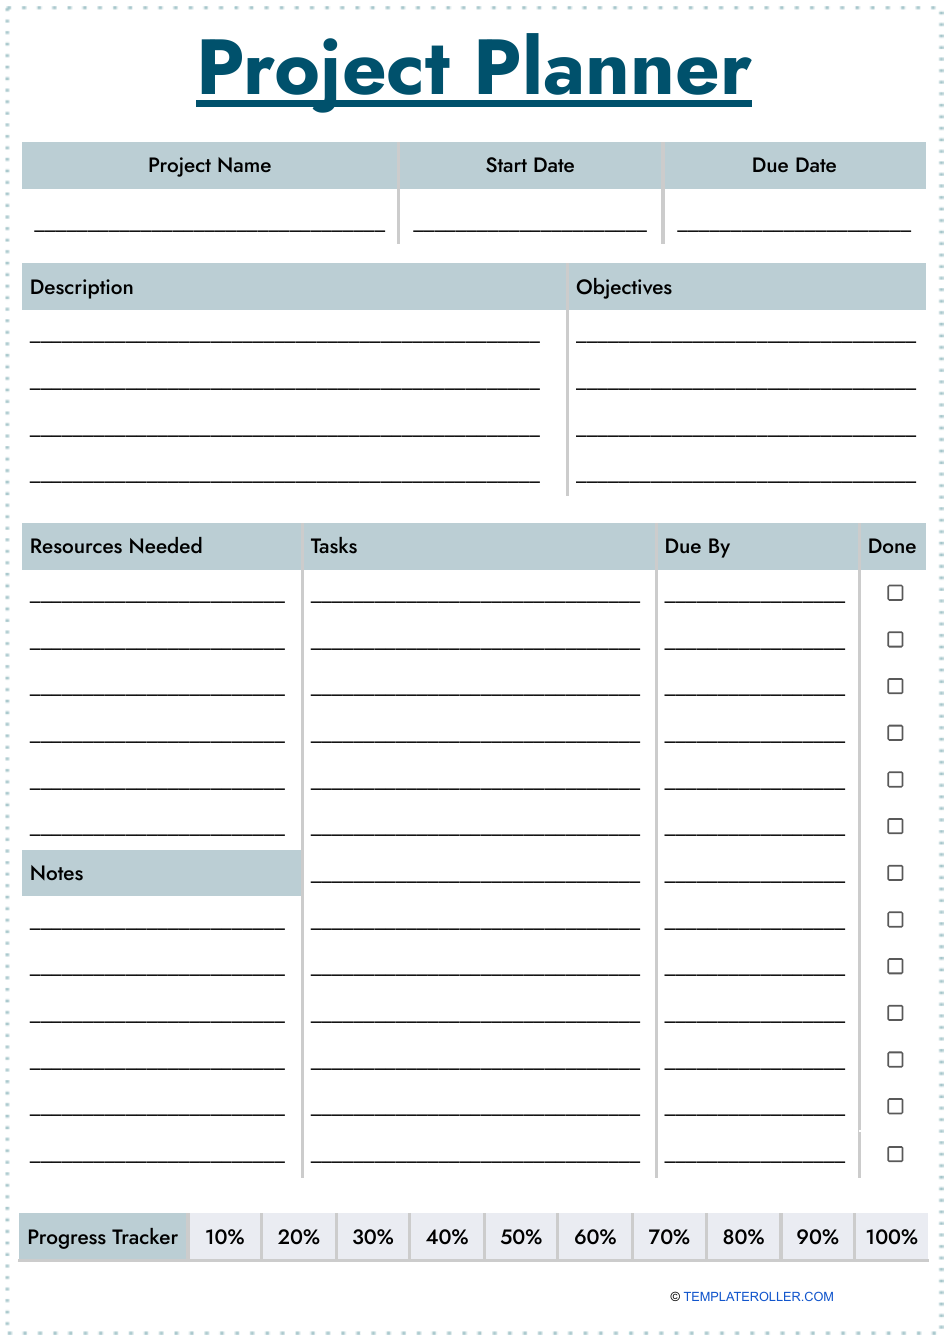 Project planner template - blue